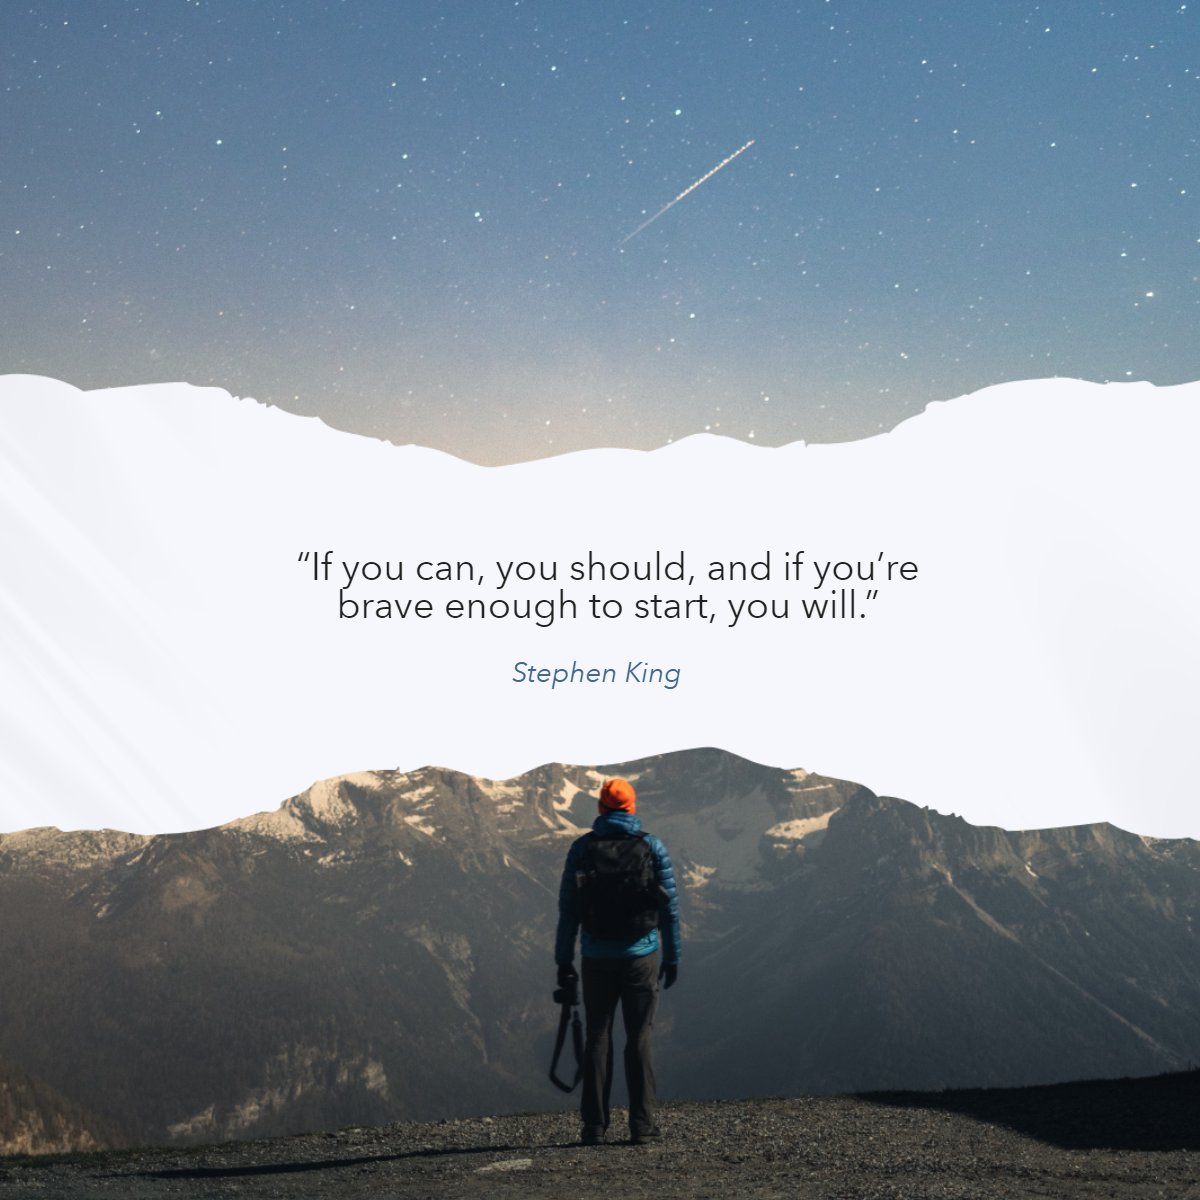 “If you can, you should, and if you're brave enough to start, you will.' 
— Stephen King

#Motivation #Inspirational #QuoteoftheDay
 #TheFryGroup #IknowRealEstate #TwinCitiesRealEstate #LocalExpert